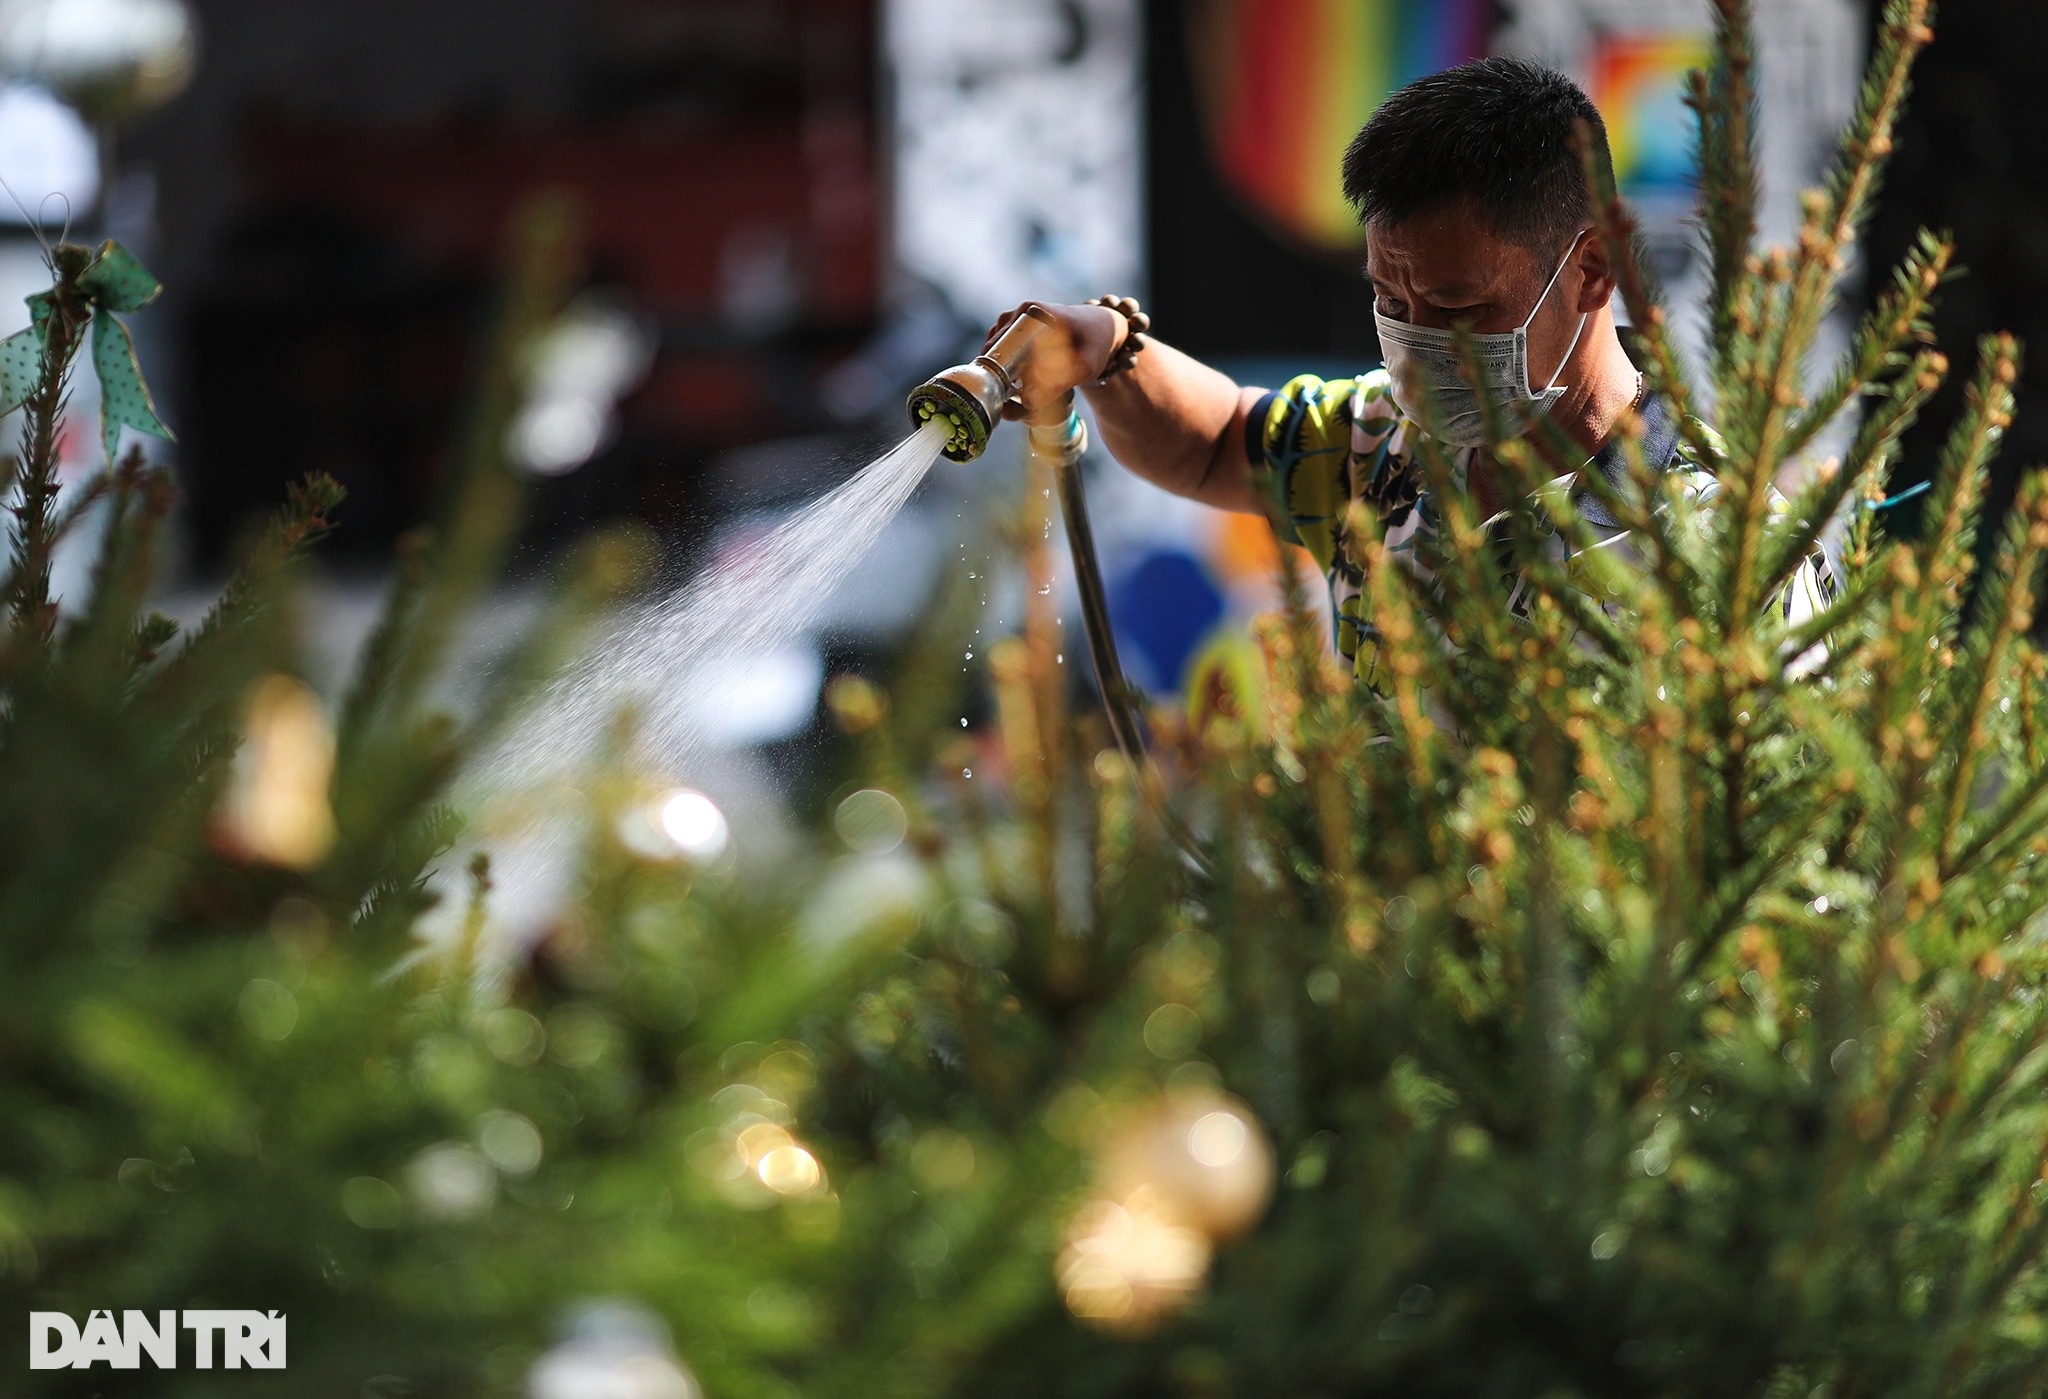 Christmas trees imported from cold European countries are sold all over Saigon's sidewalks - 5